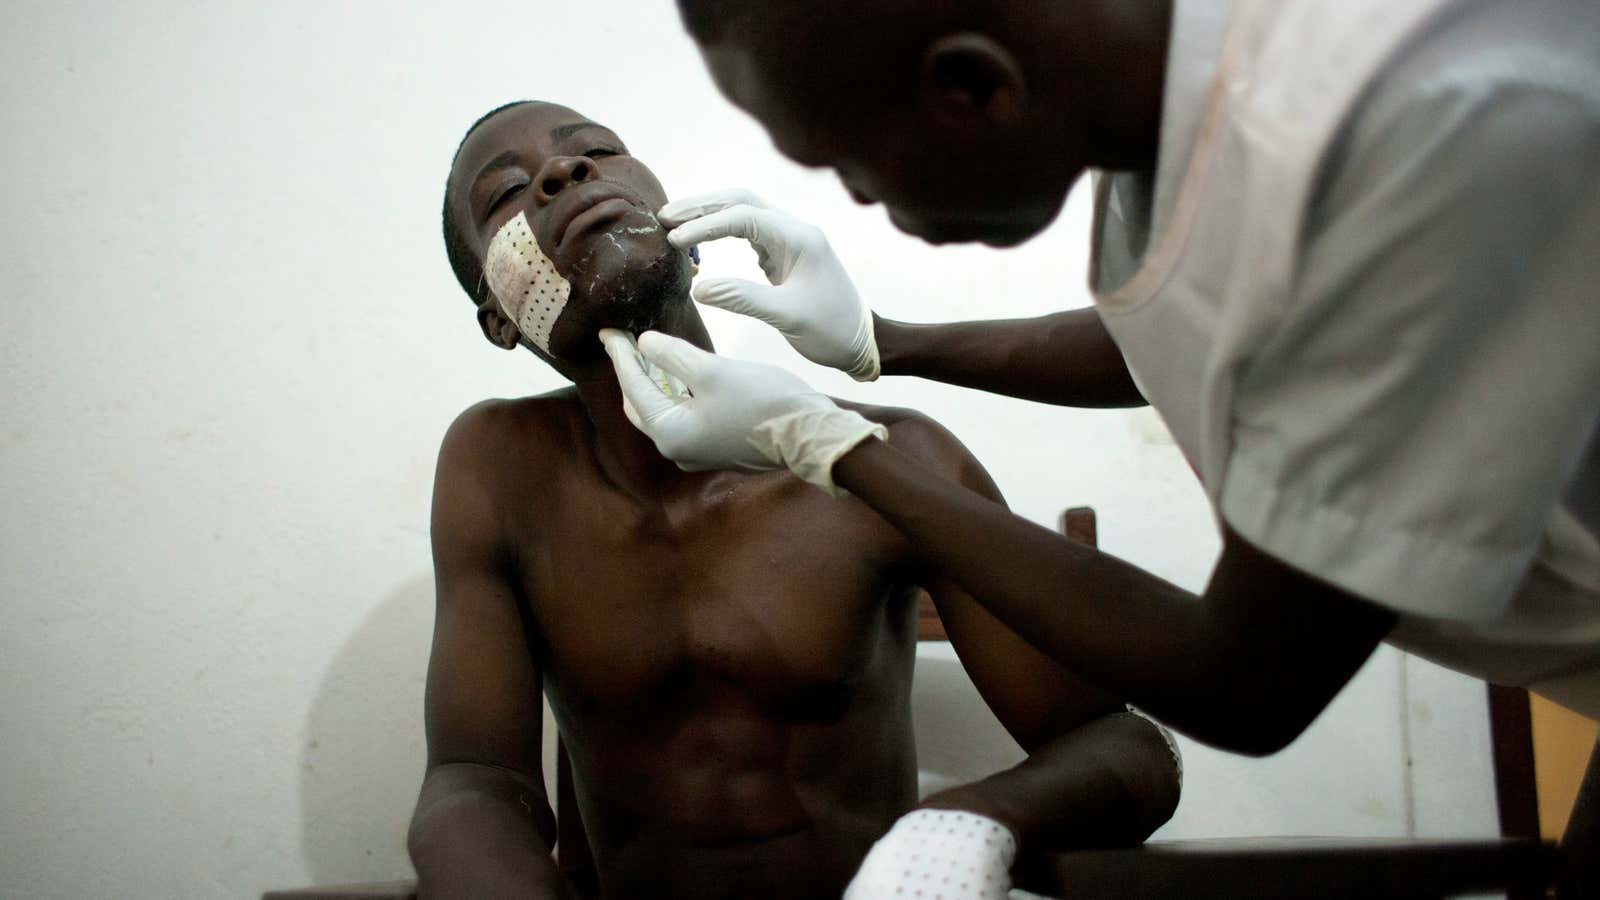 A medical worker changes the bandages of a young man who survived a machete attack, at a Doctors Without Borders clinic in a camp for…